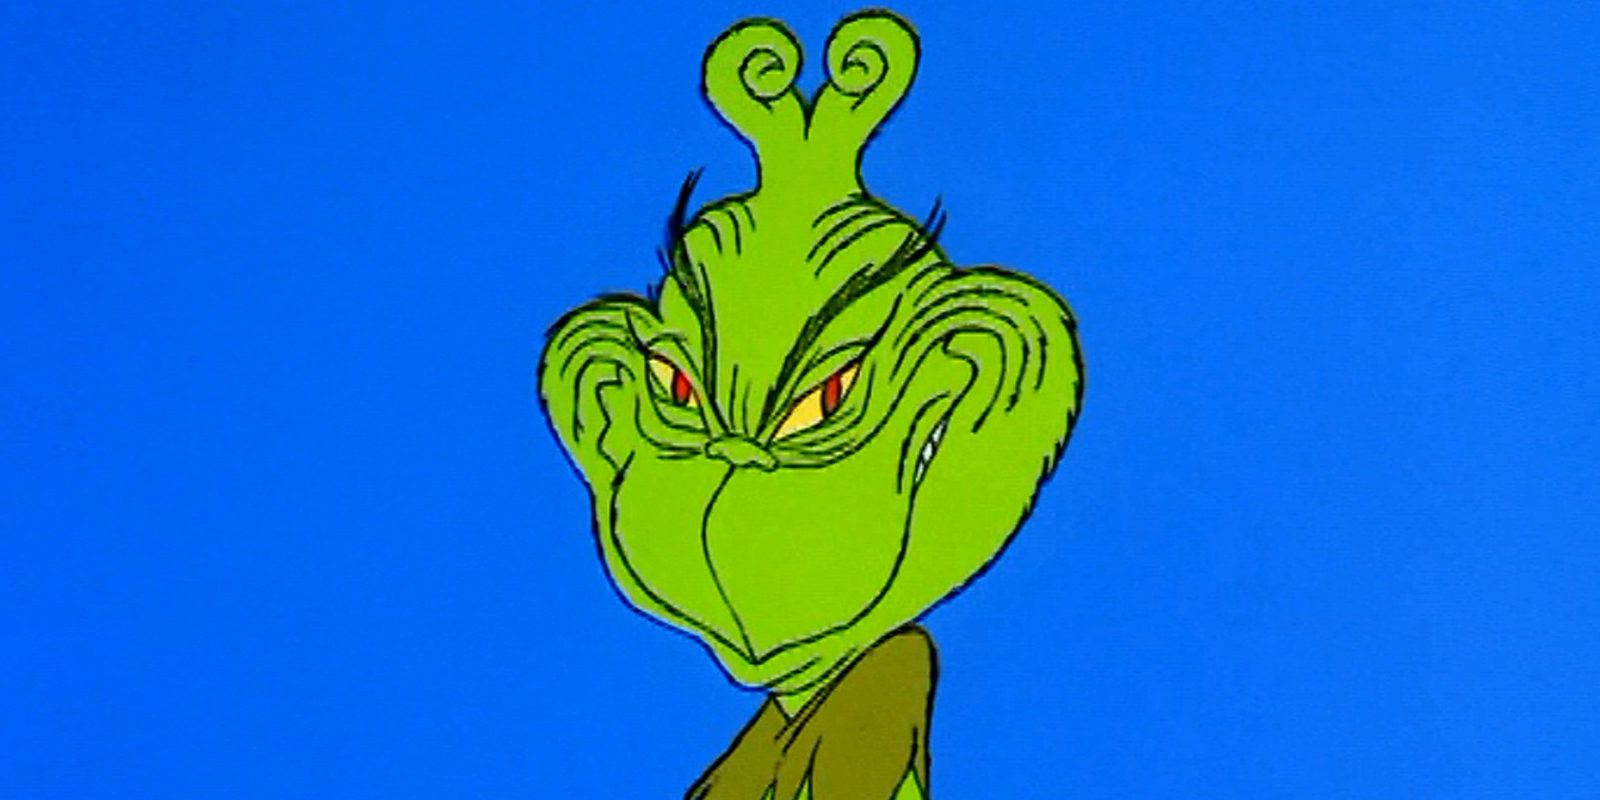 Grinch smiling in 1966's How the Grinch Stole Christmas